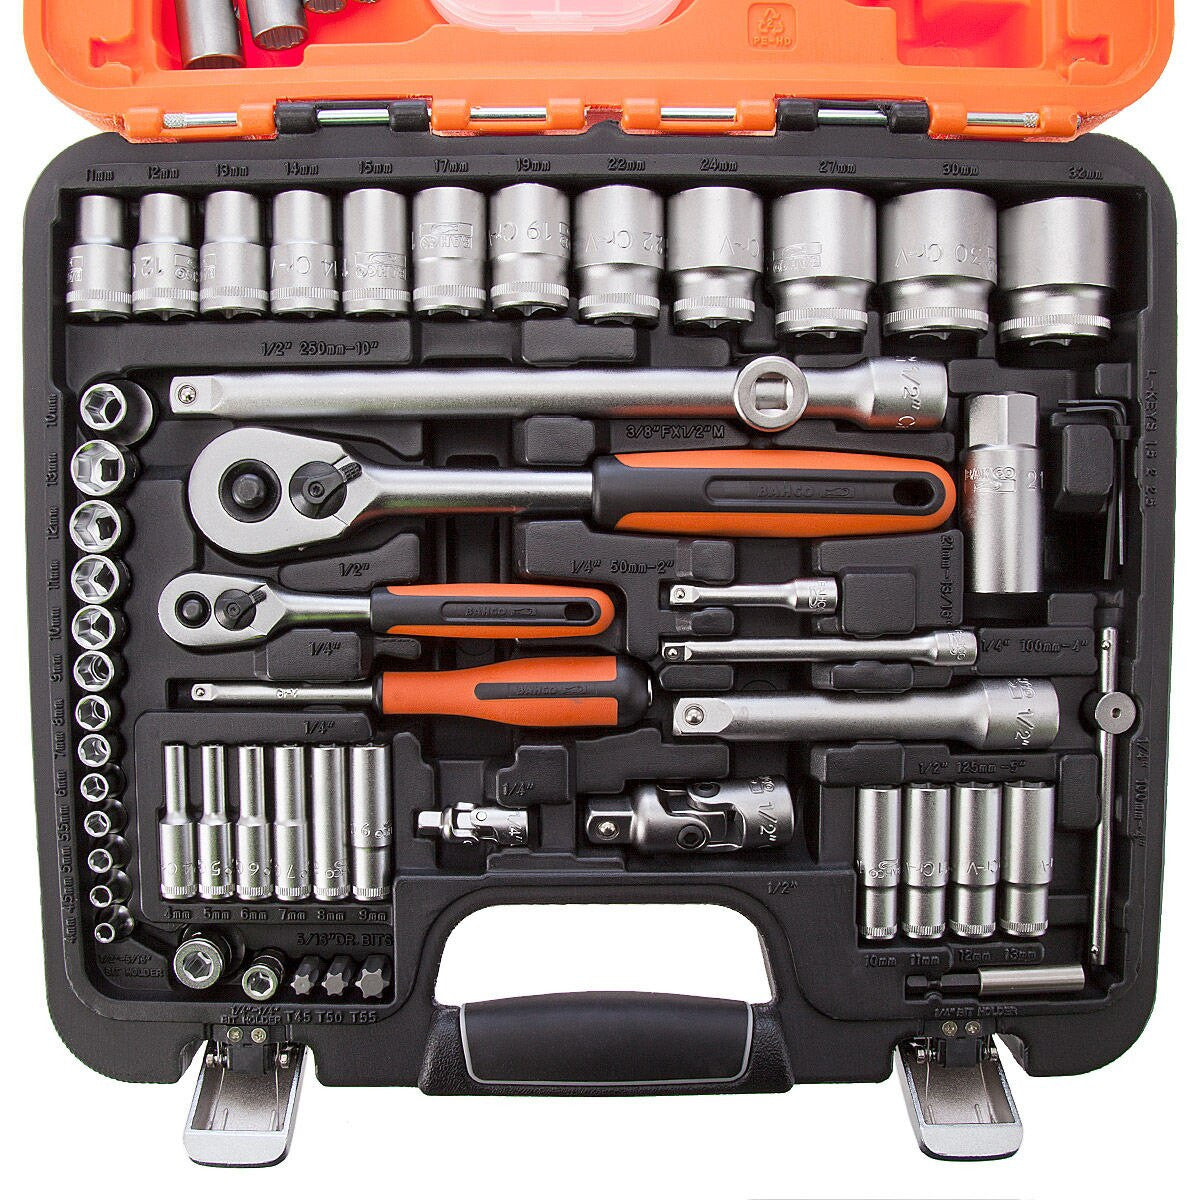 Bahco S910 Socket Set 1/4in, 1/2in and Dynamic Drive (91 Piece)